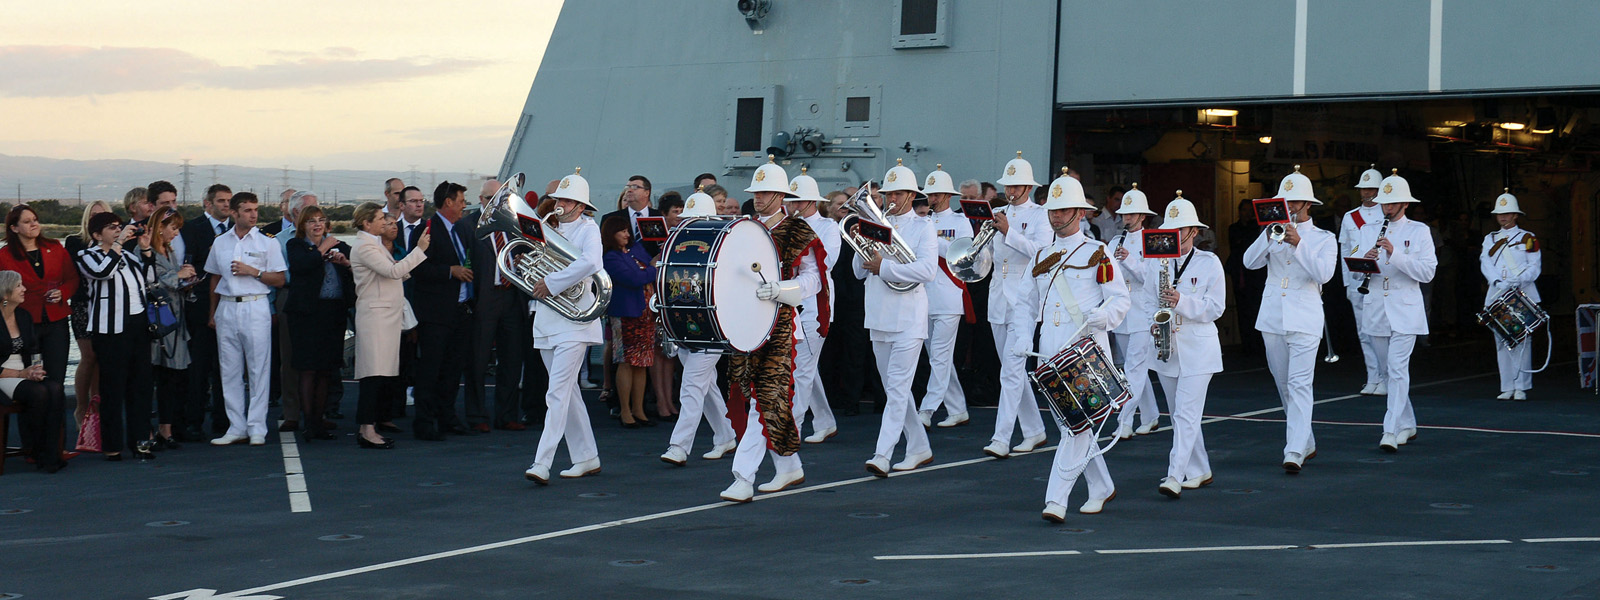 A naval band performing on the deck of a ship